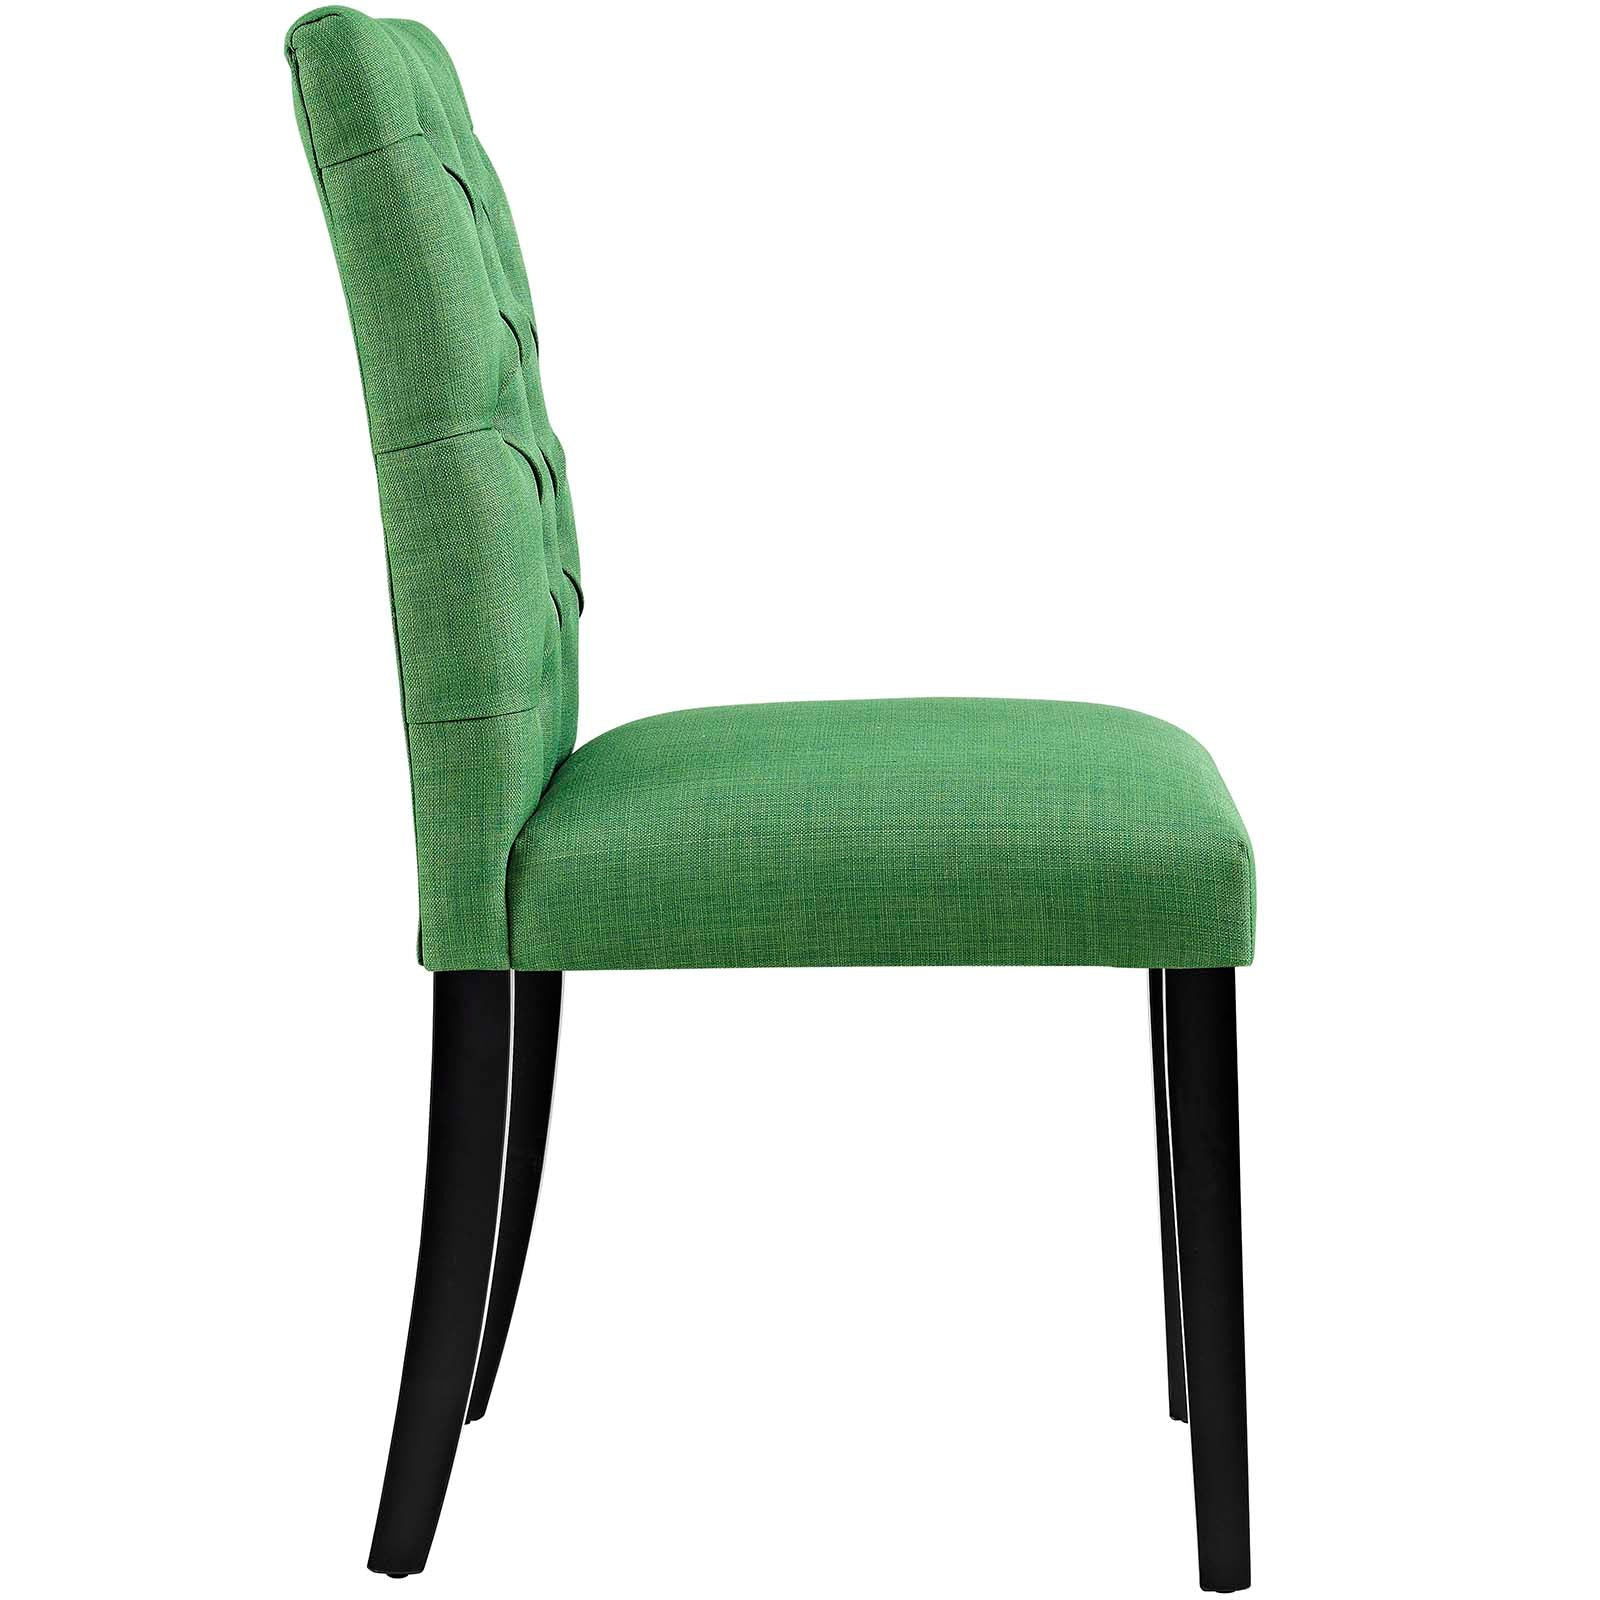 Modway Dining Chairs - Duchess Fabric Dining Chair Kelly Green